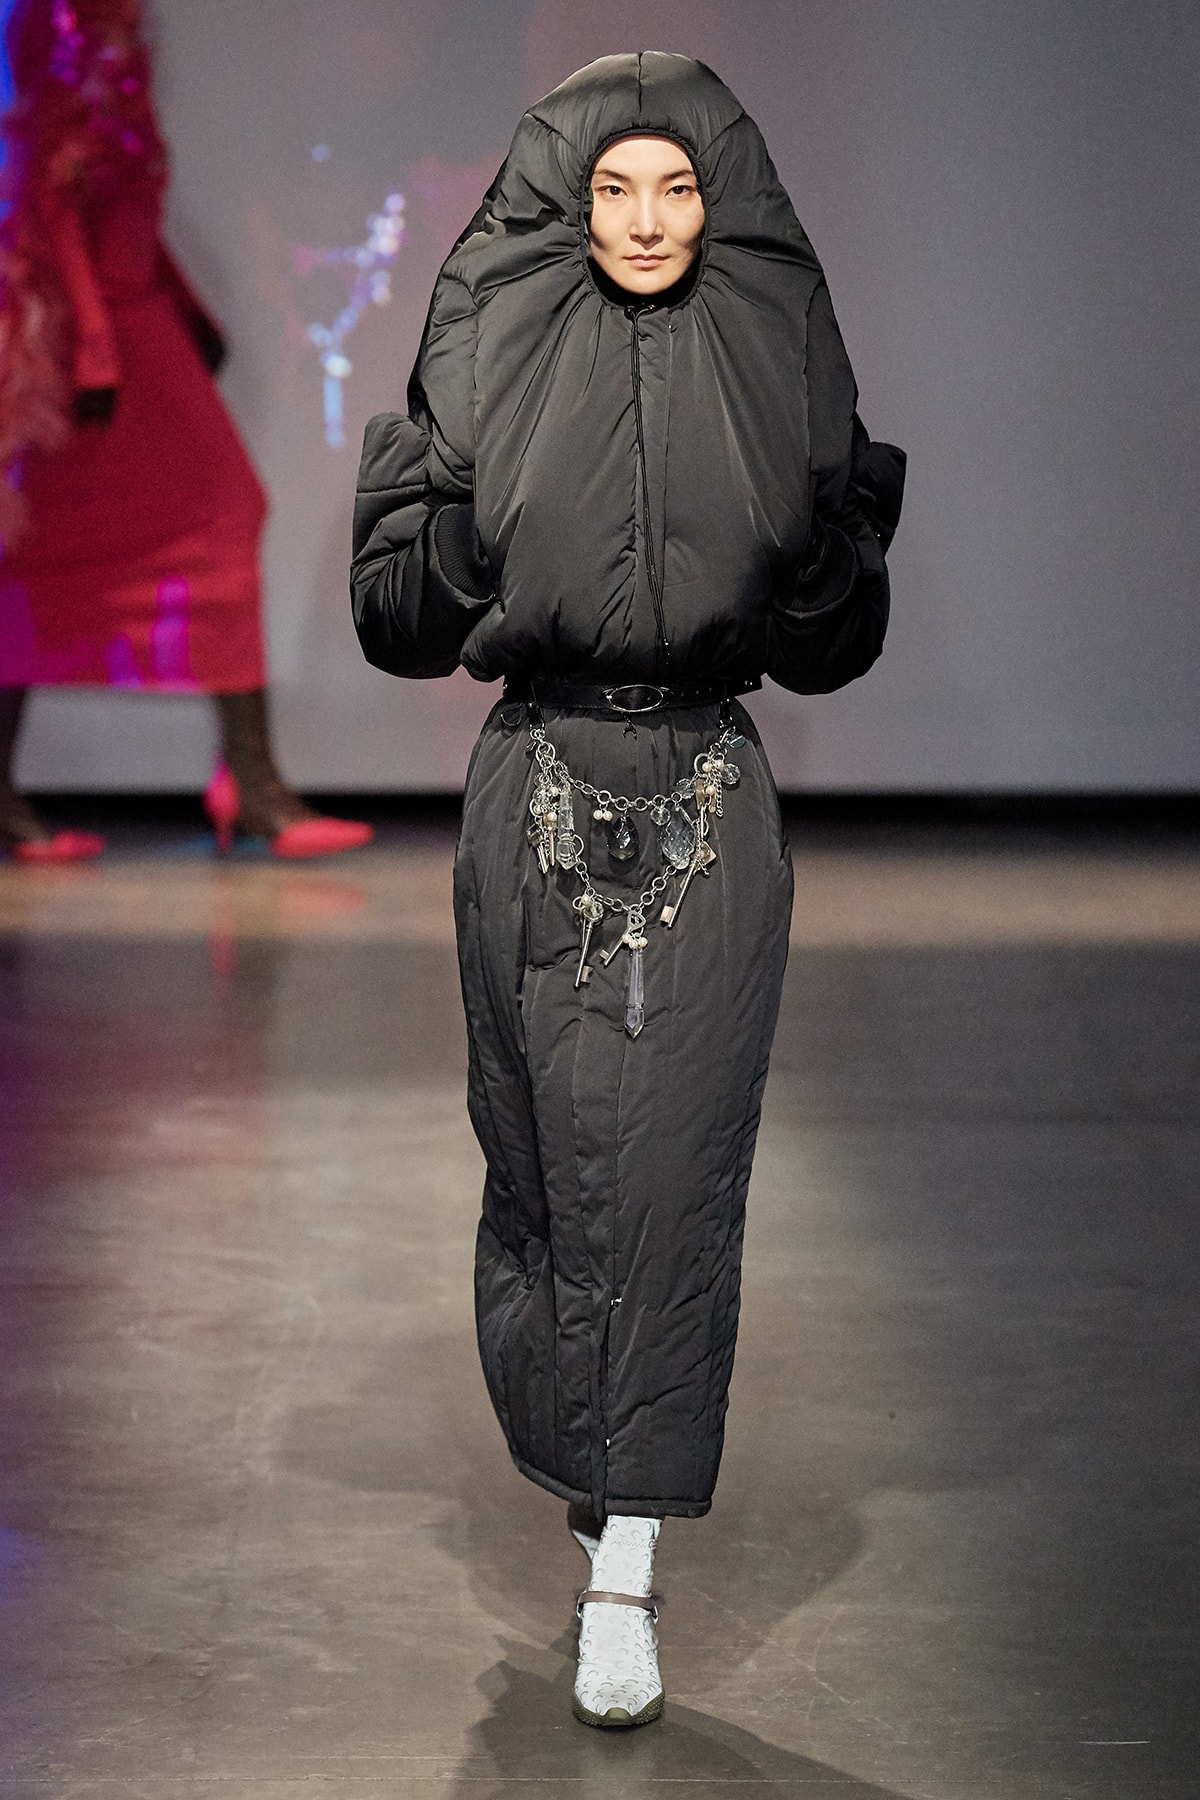 Marine Serre Fall/Winter 2020 Collection Runway Show Cocoon Dress Black